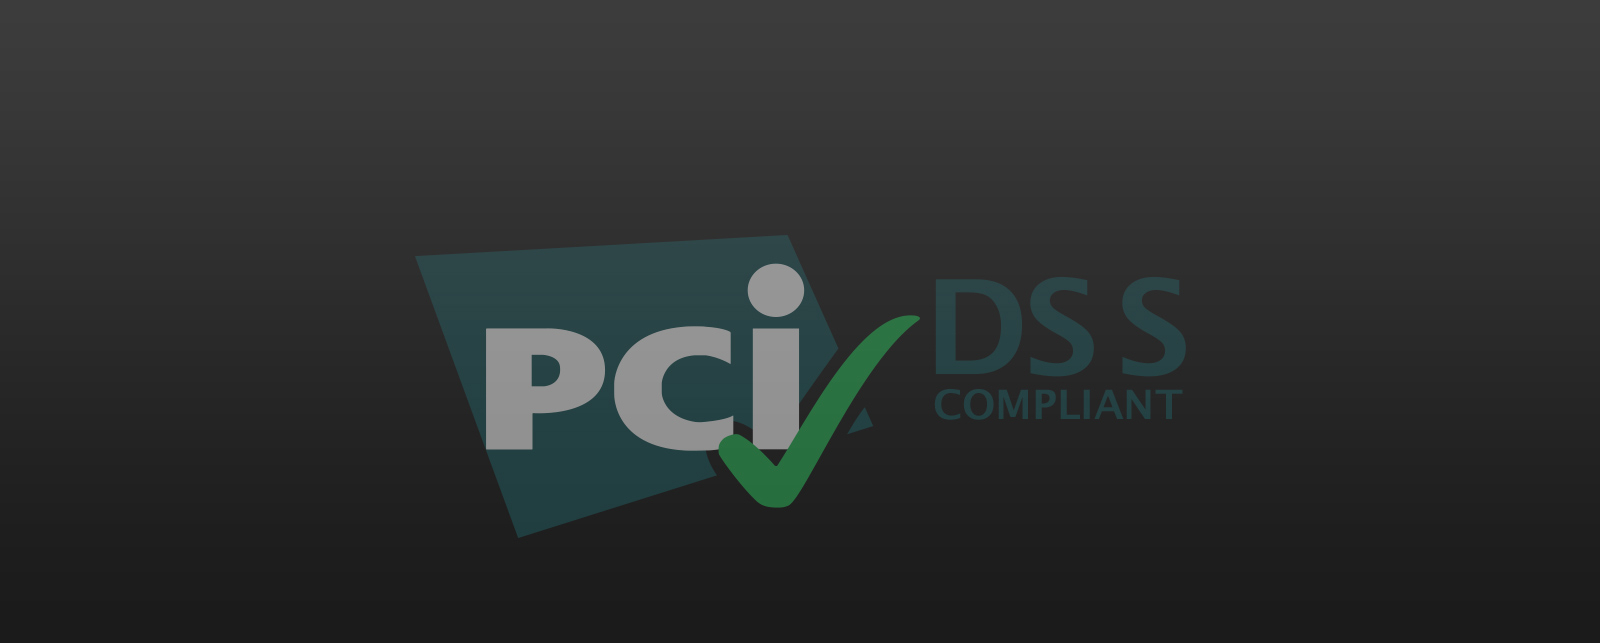 Pci Controls Spreadsheet In Download: Pci 3.2 Security Controls And Audit Checklist  Xls Csv